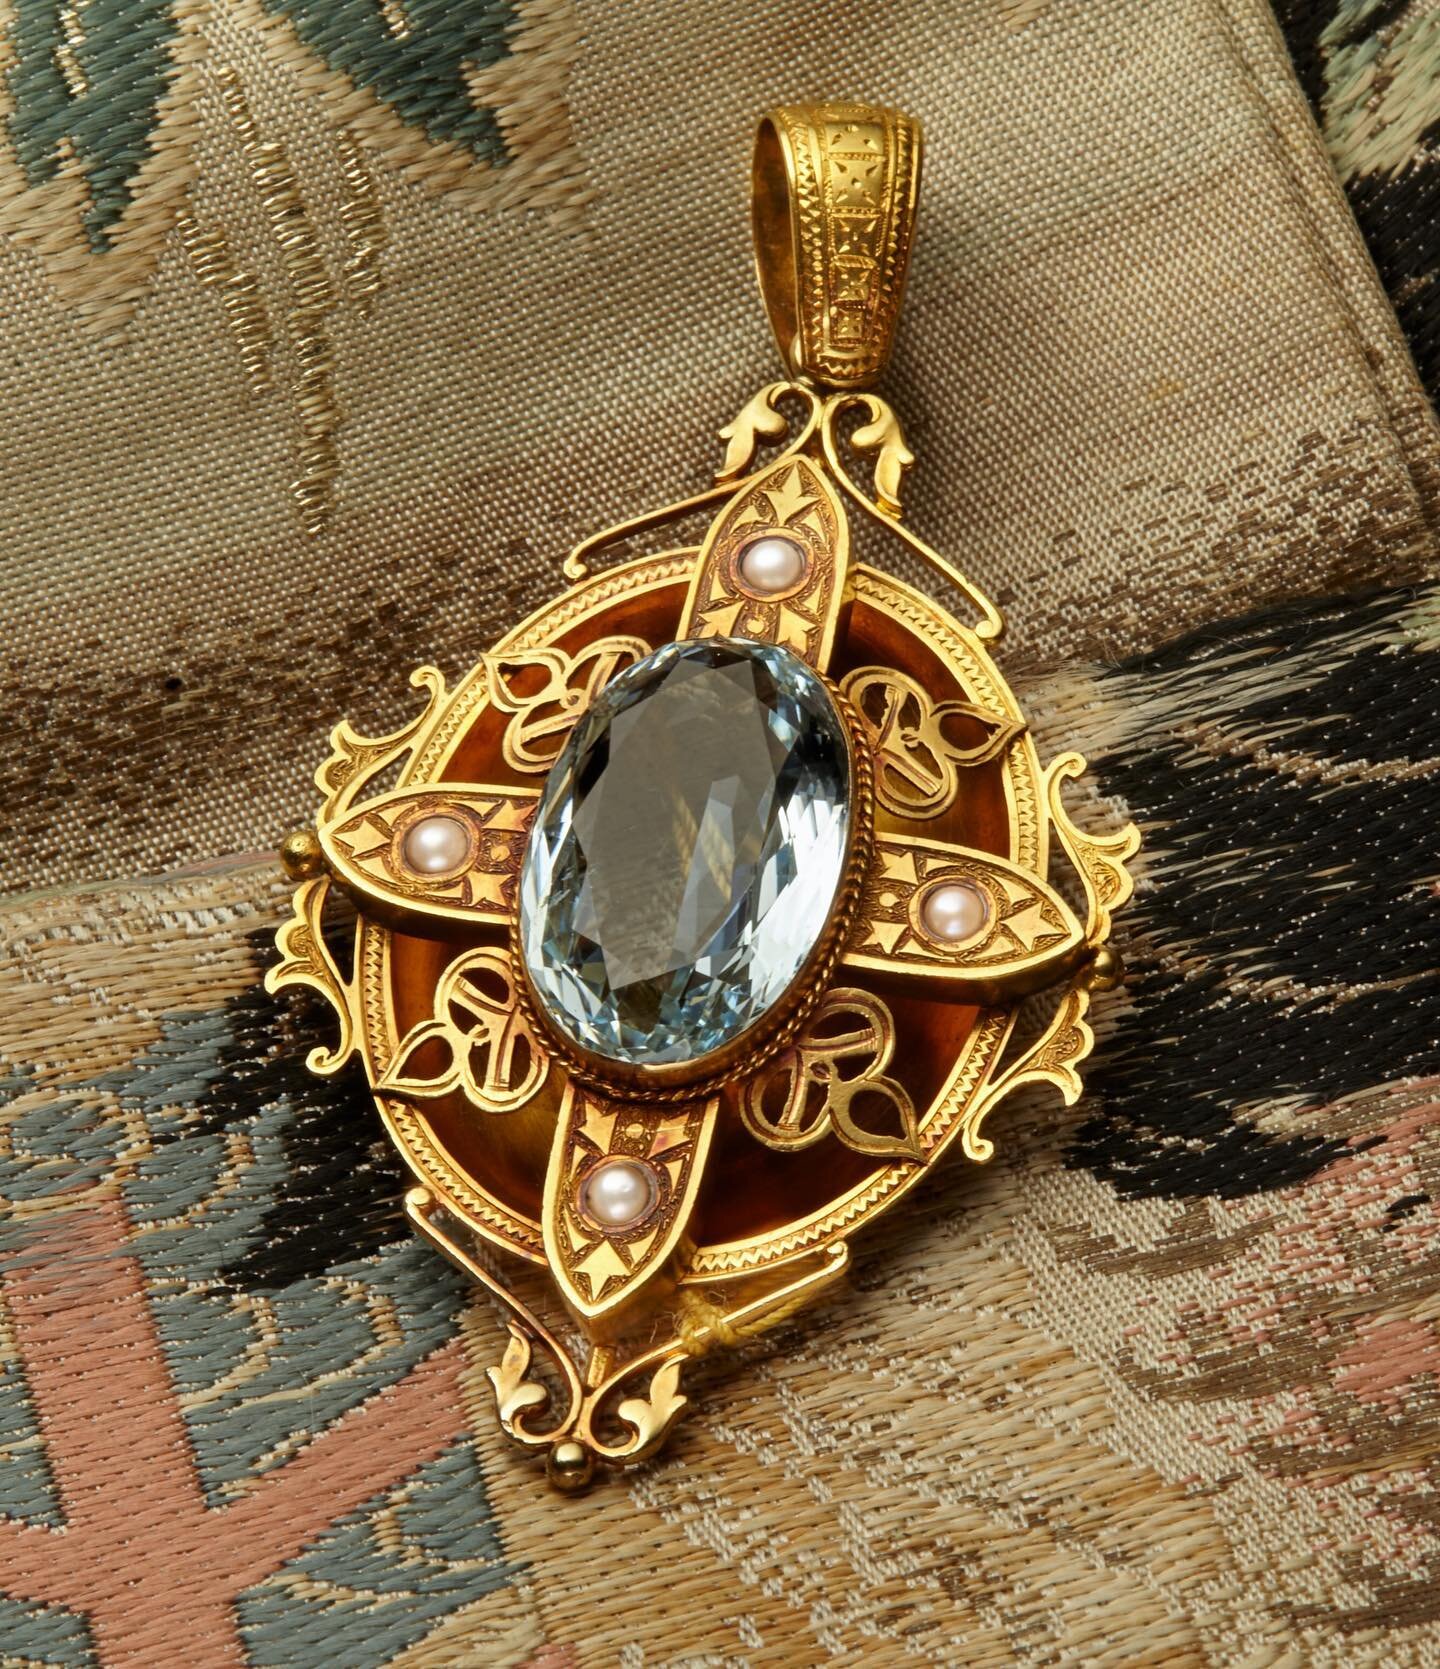 The aquamarine center of this is so beautifully cut and the saturation of color in the stone is spectacular! Gracefully mounted in romantic gold with a setting highlighted by pearls. This is graceful, charming and beautiful on a striking gold chain. 